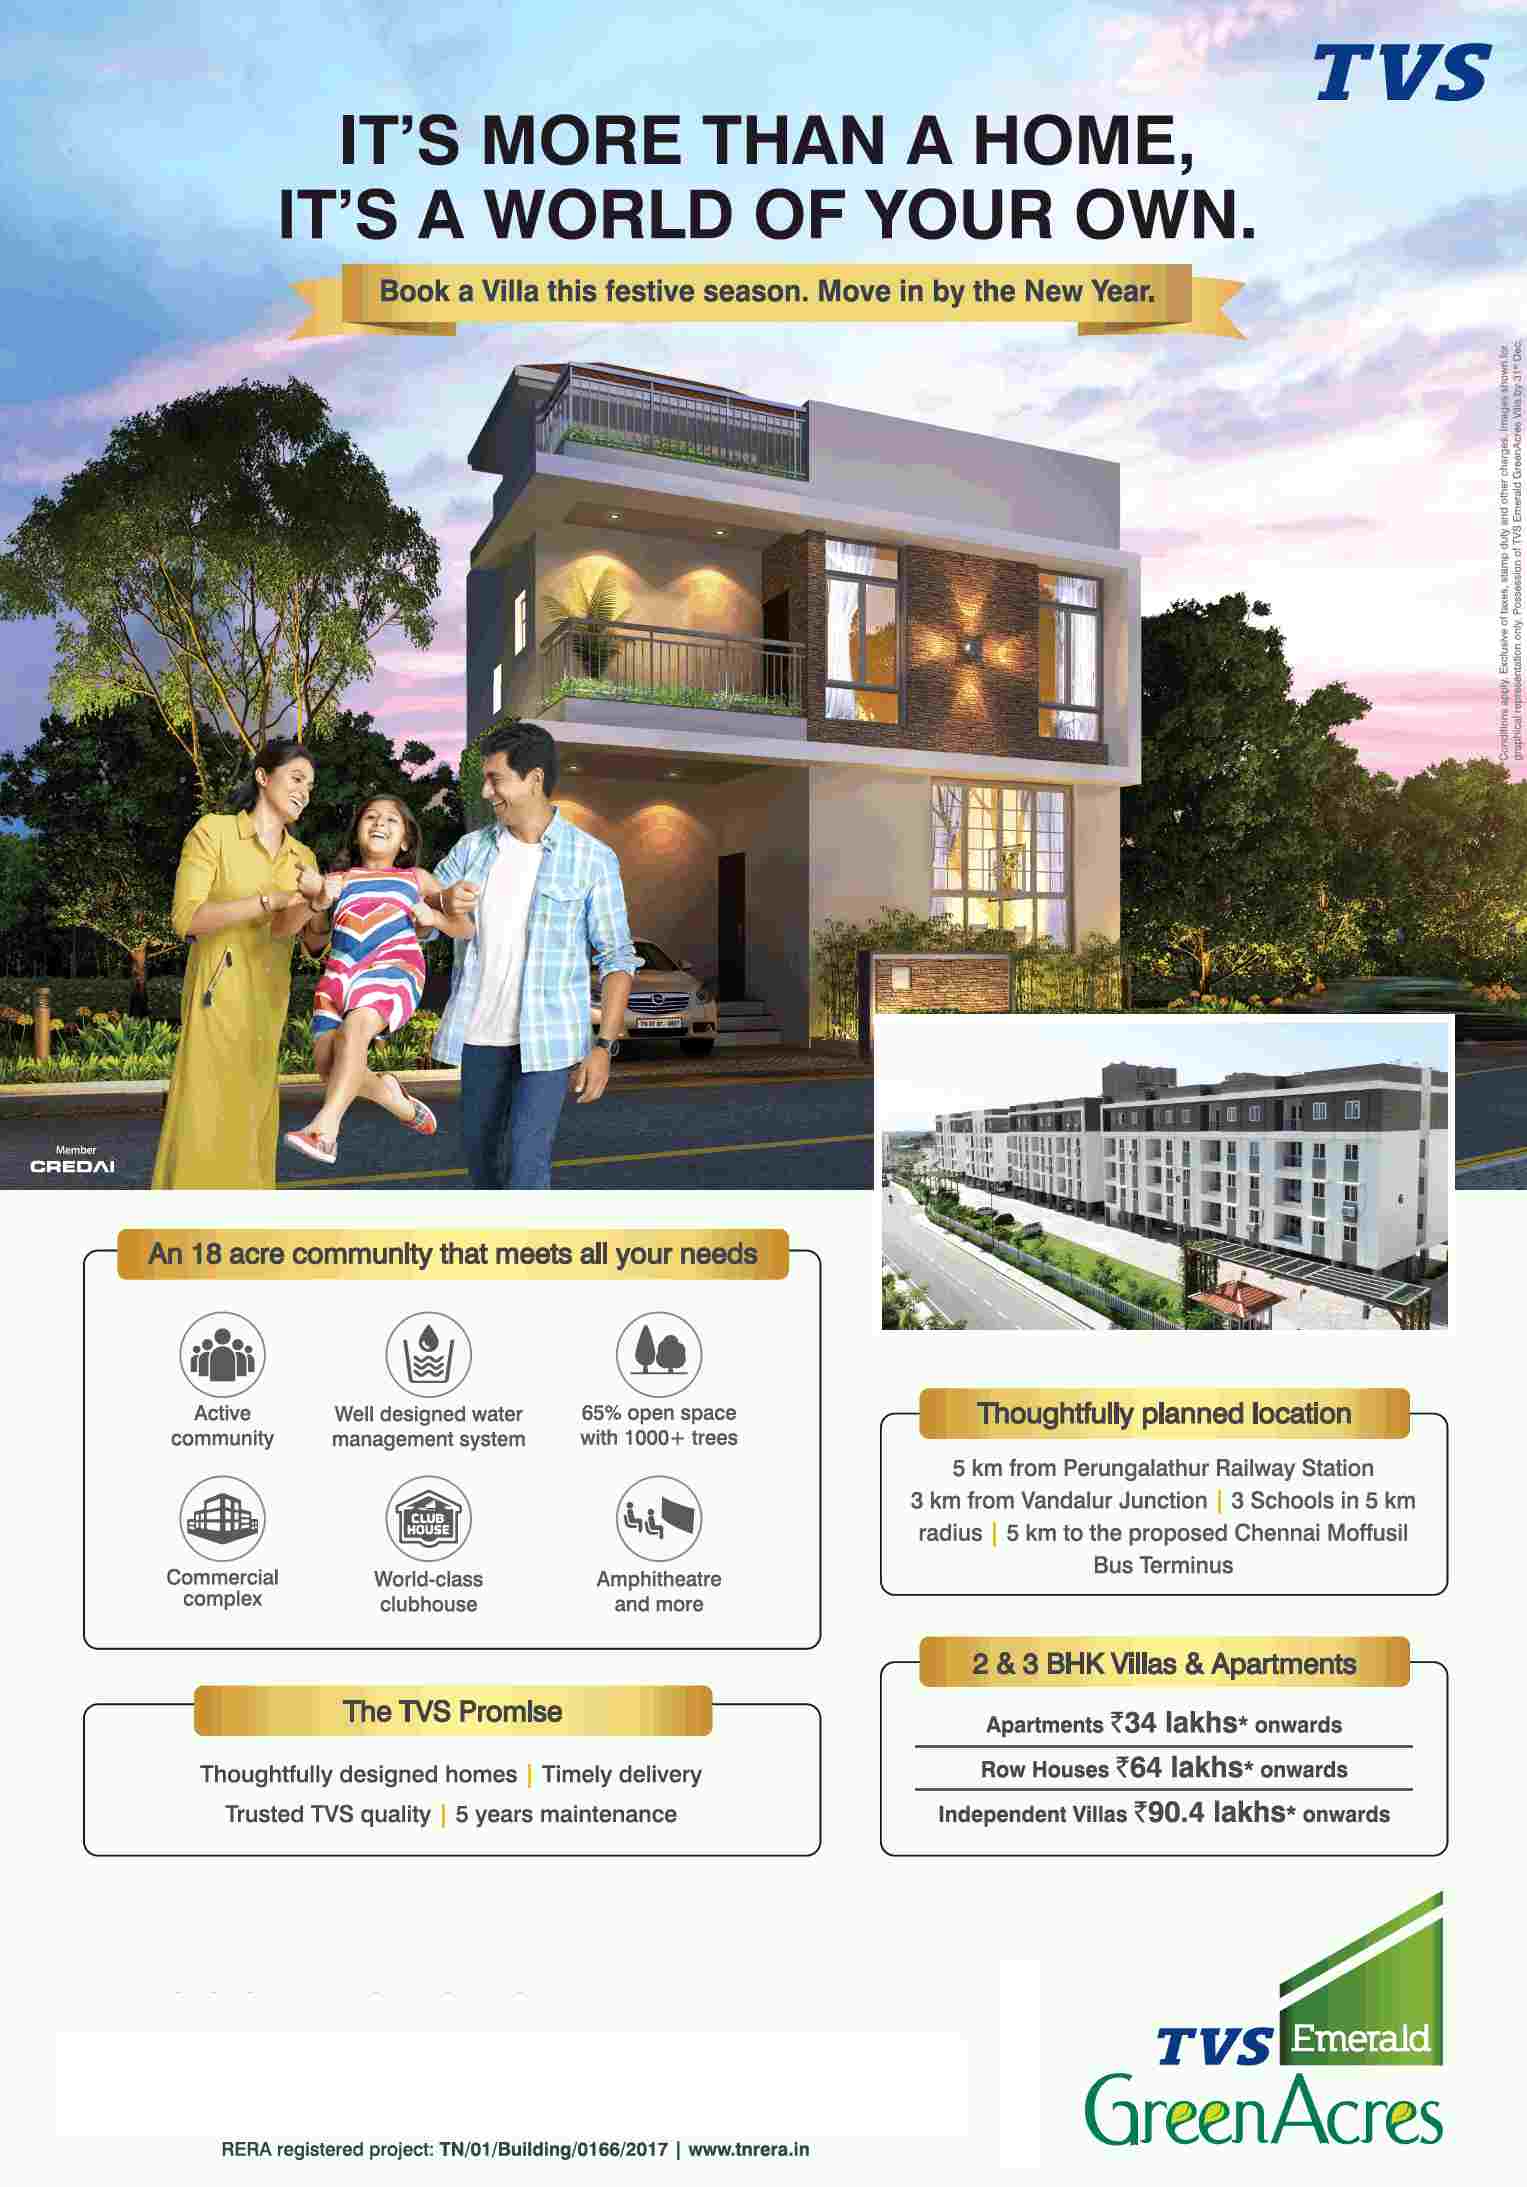 Live in 18 acre community that meets all your needs at TVS Emerald Green Acres in Chennai Update